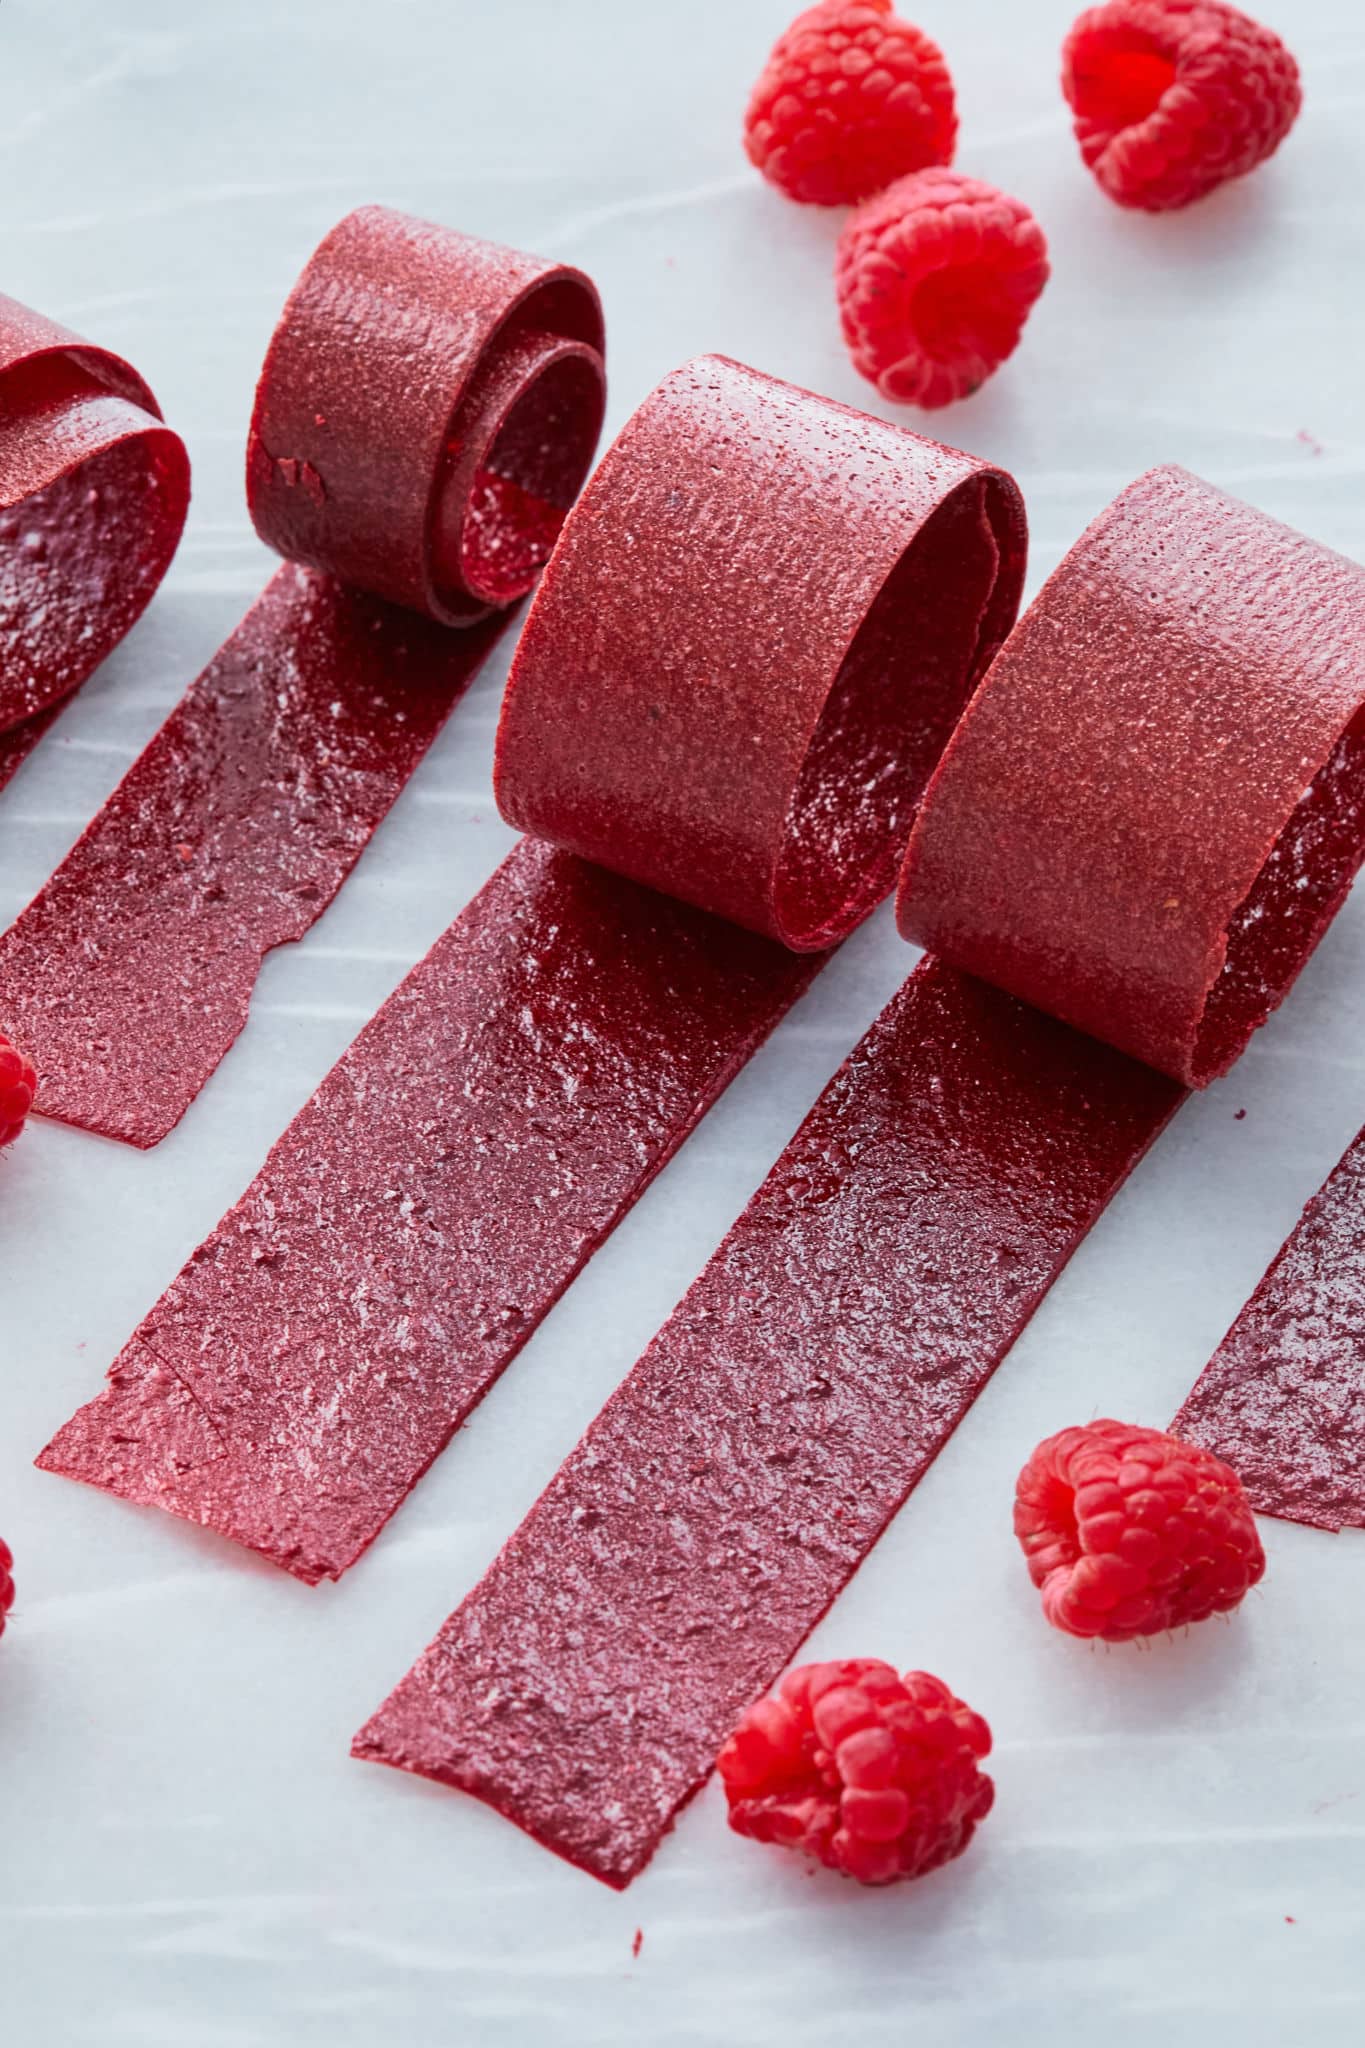 Homemade raspberry fruit leather has been cut into 1-inch wide strips and rolled up for a great homemade lunch box snack.